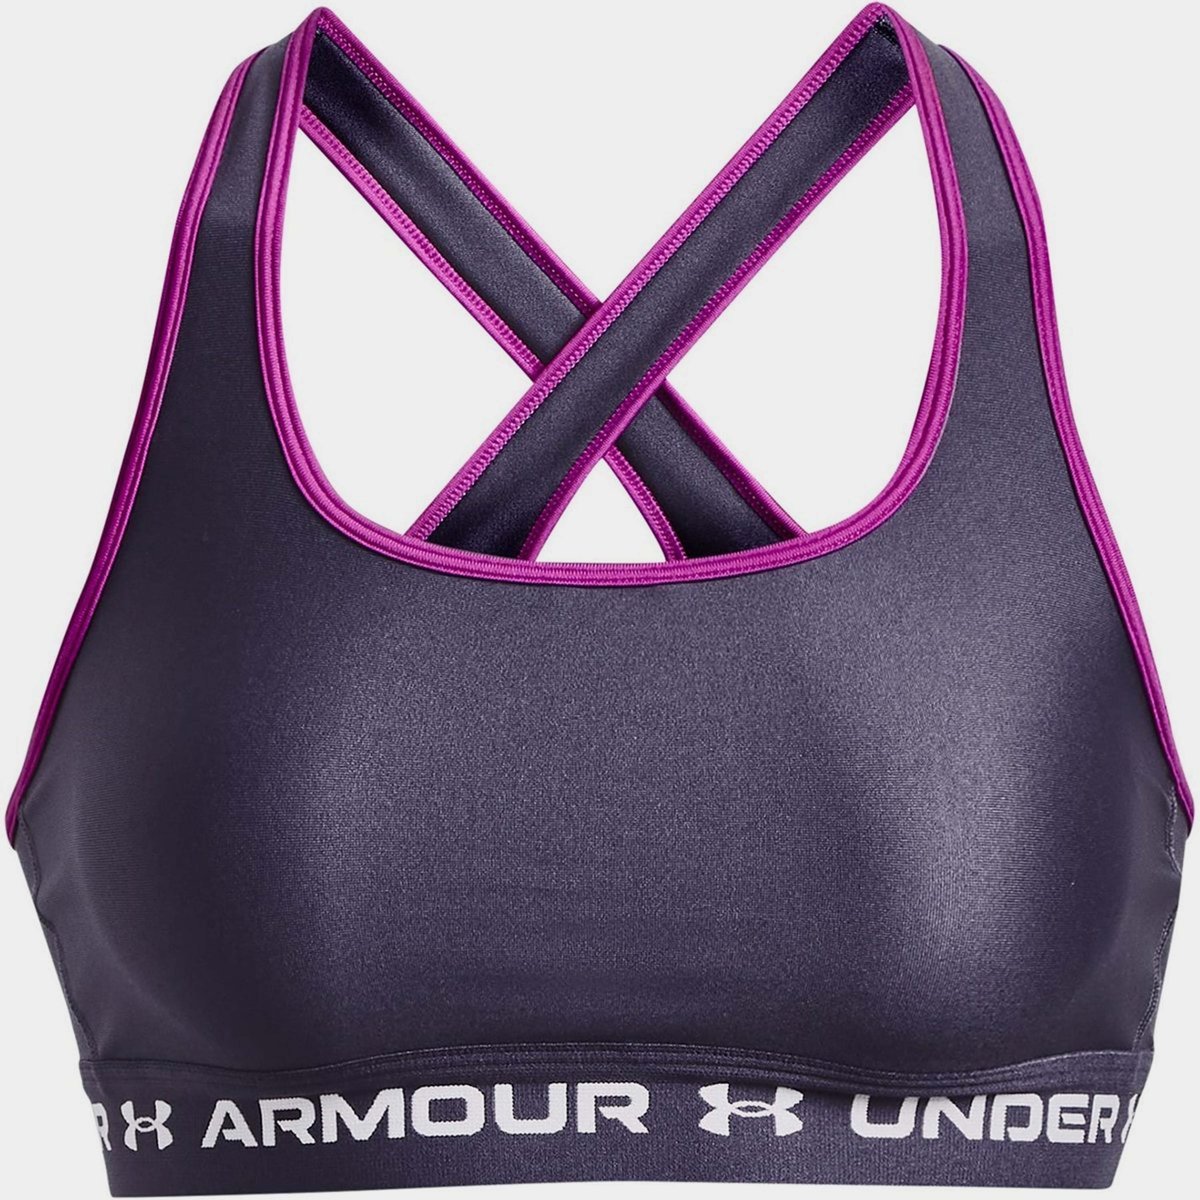 Elevate Your Rugby Game with Under Armour: Performance Gear for